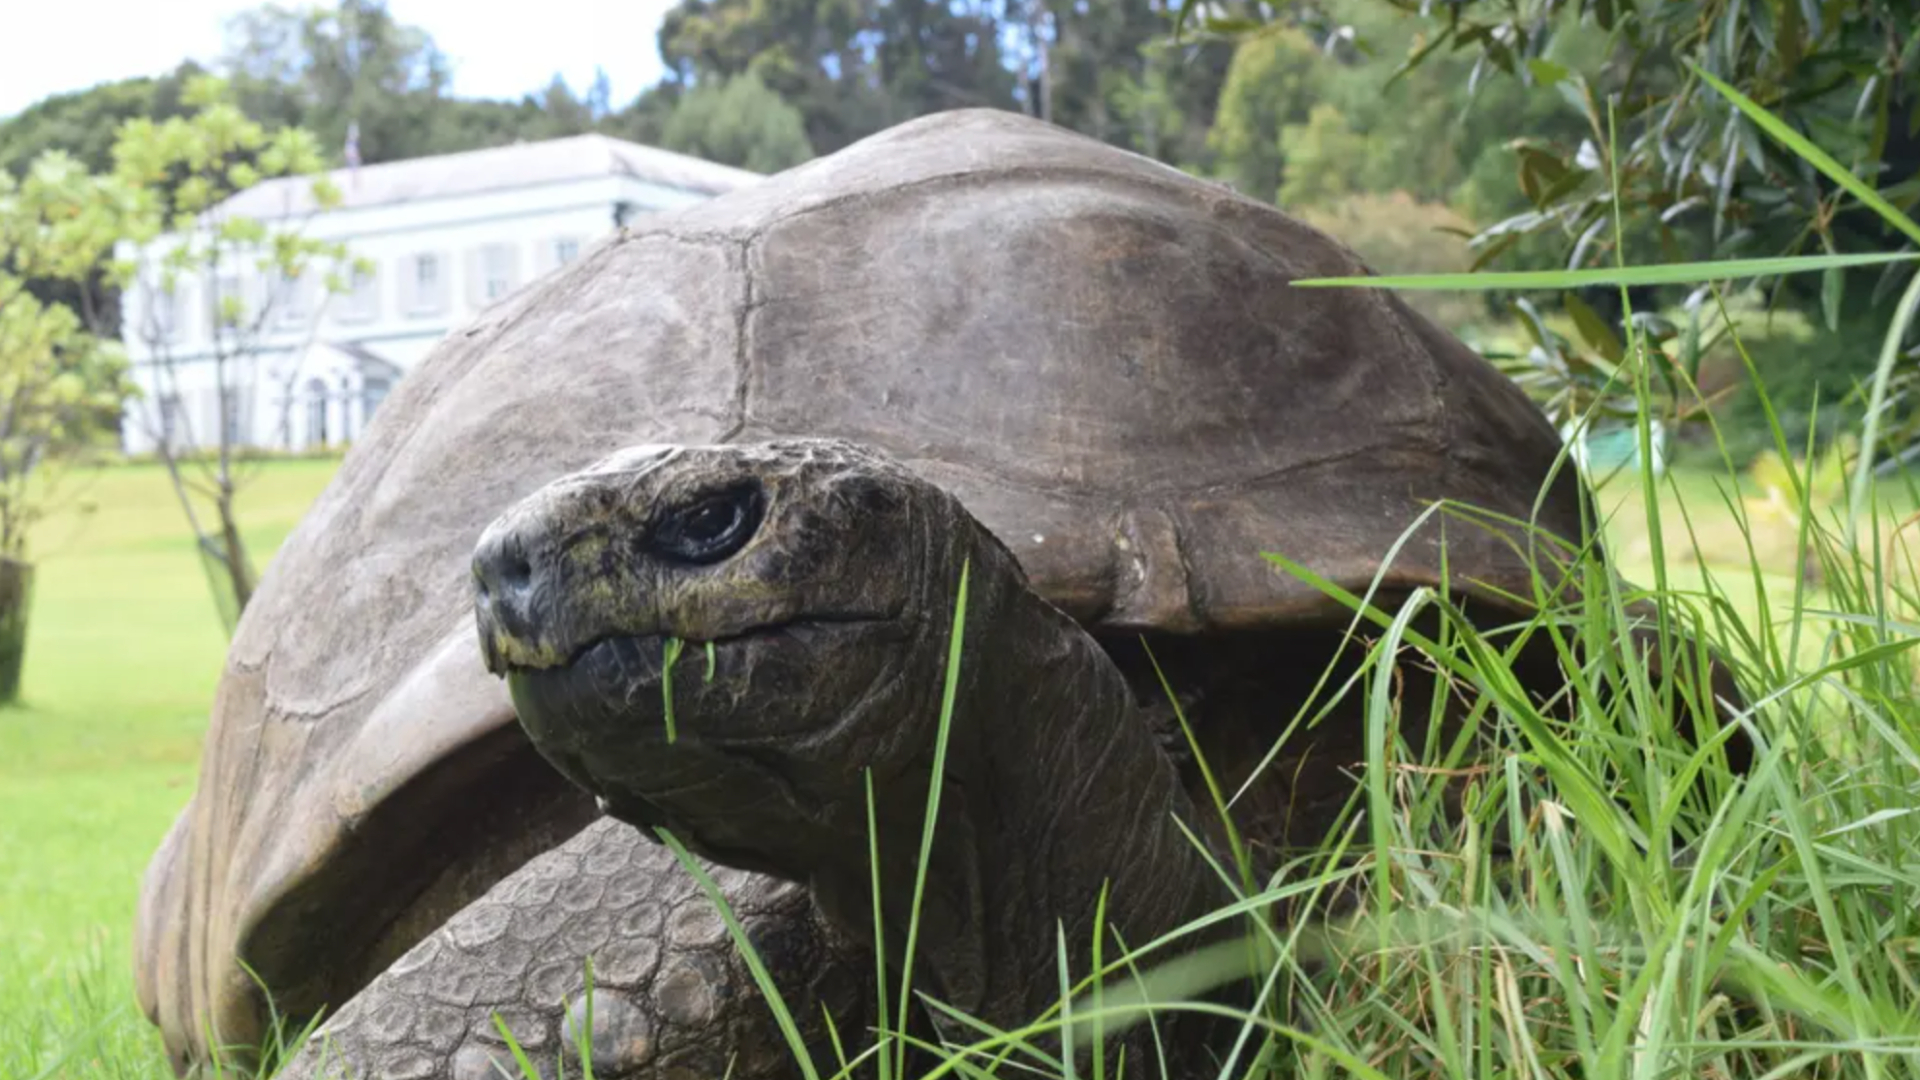 This tortoise just turned 190 years old